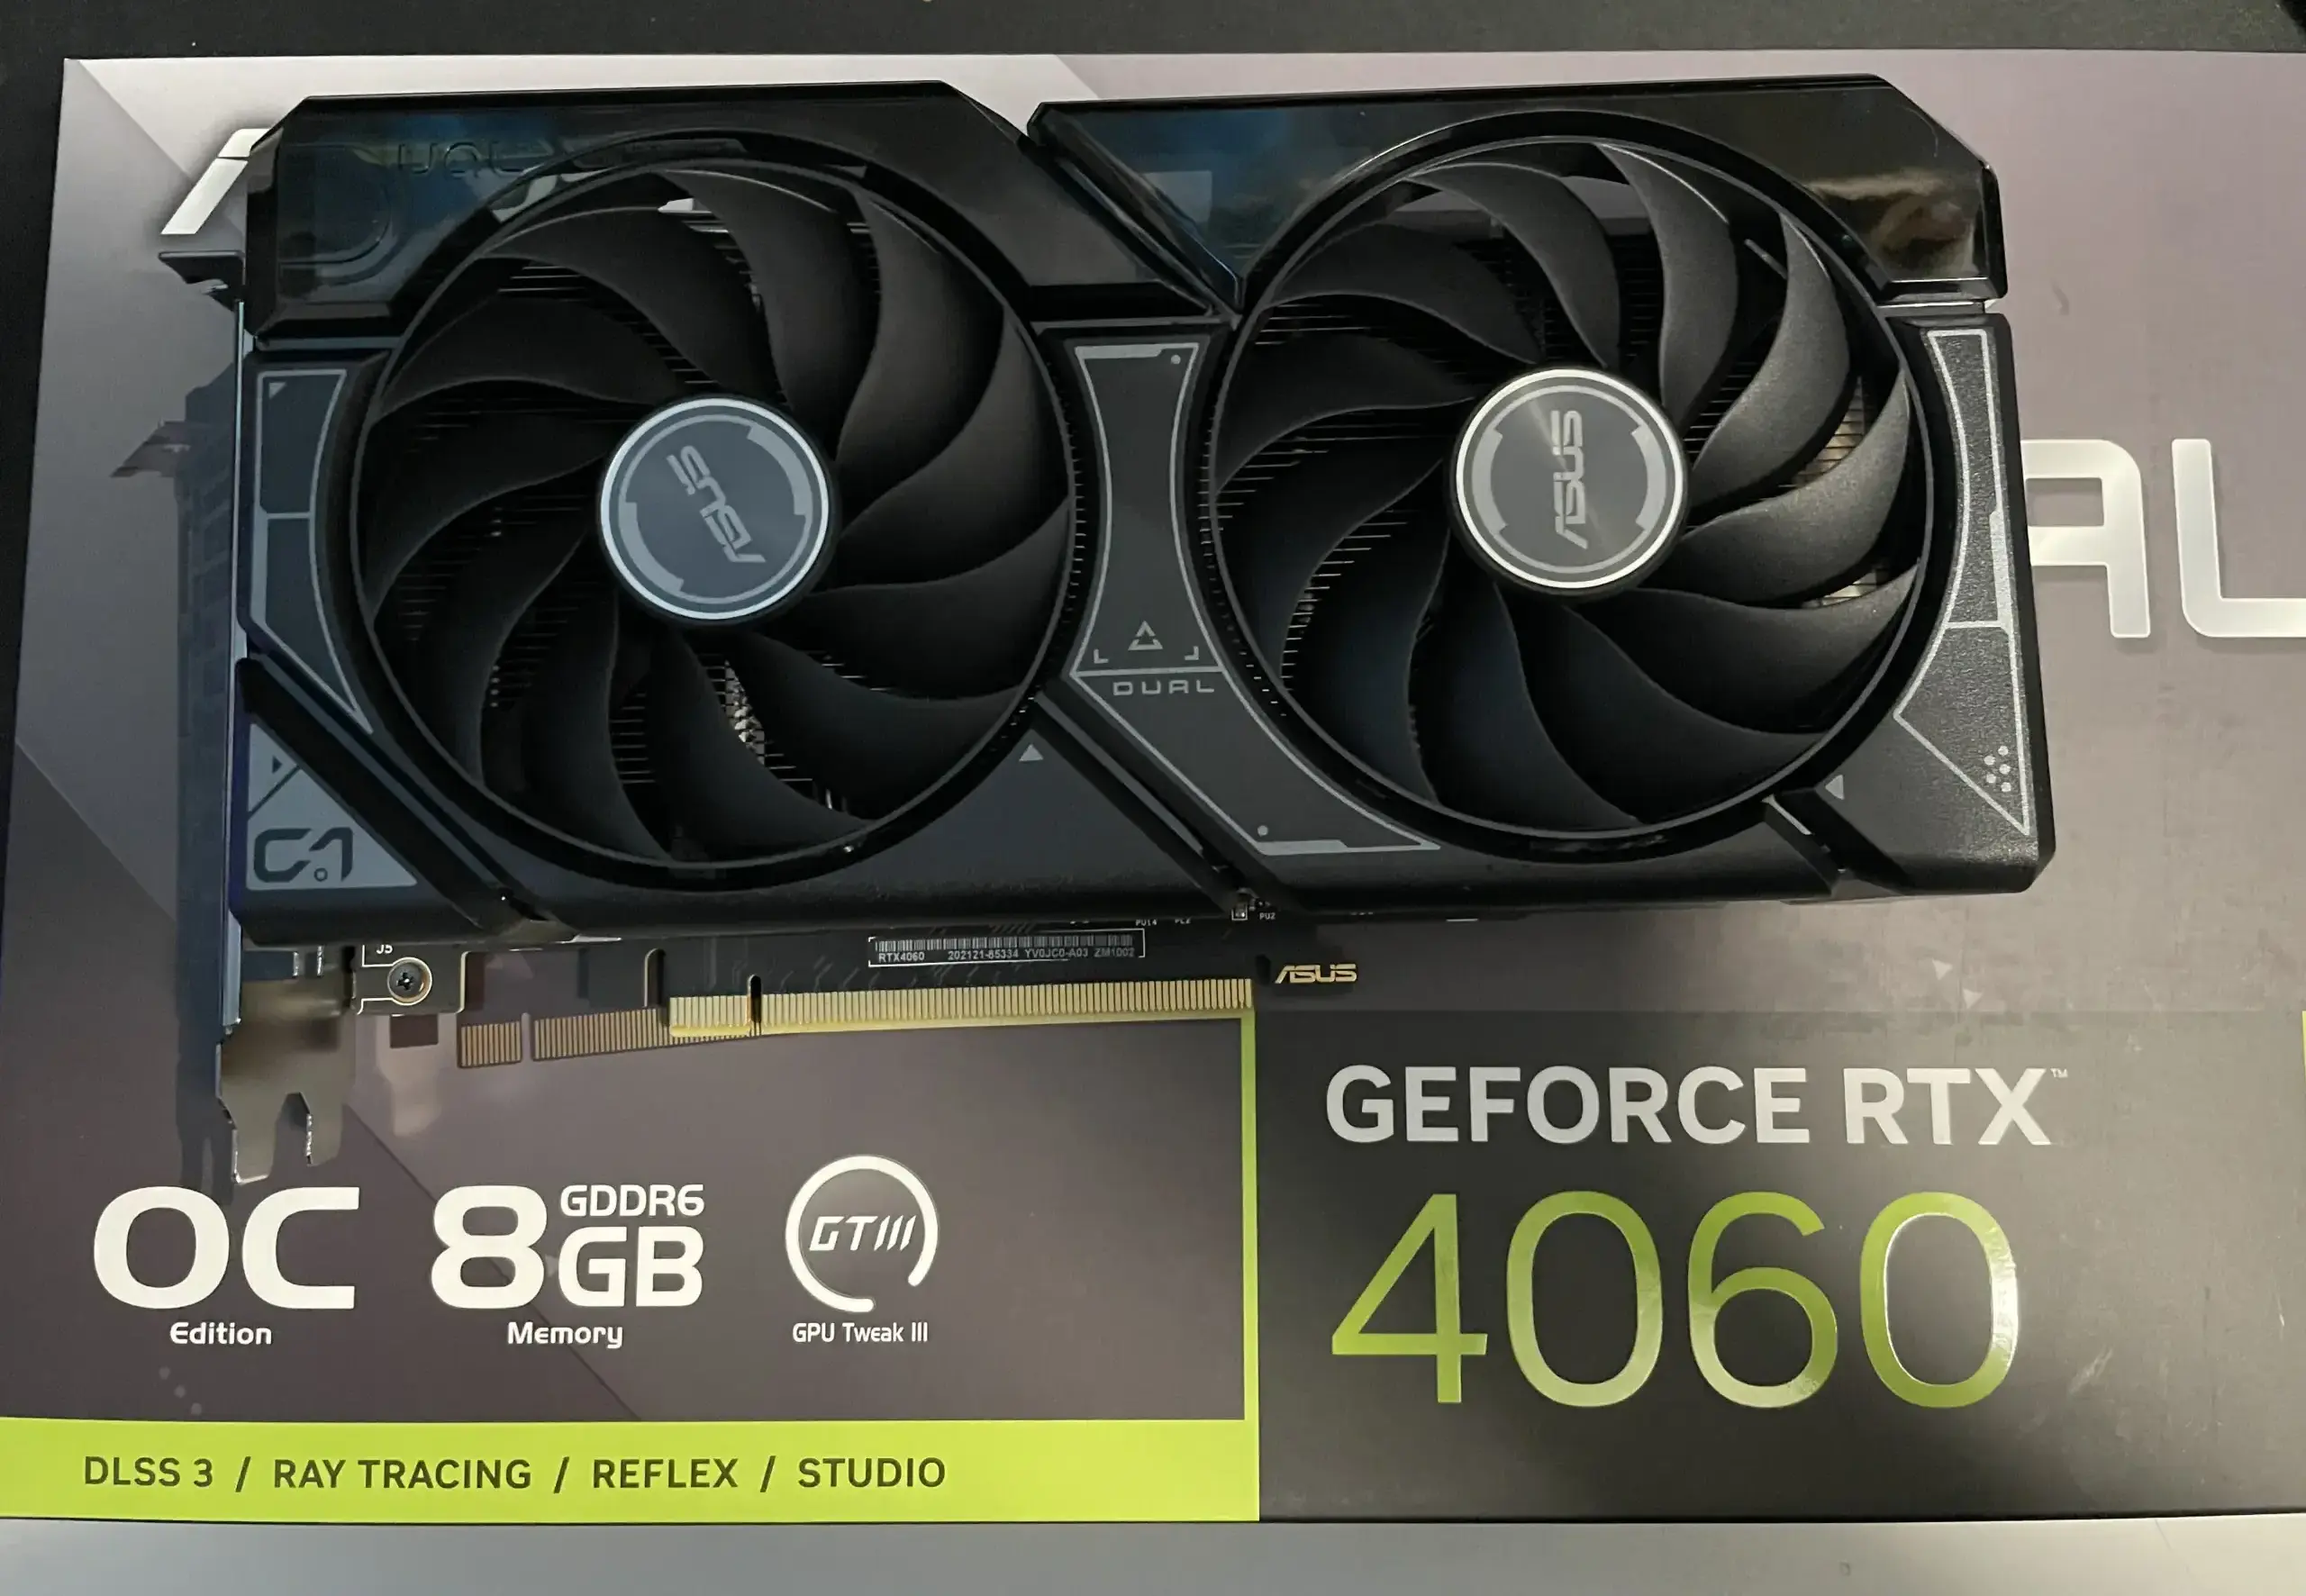 Nvidia Quietly Launches GeForce RTX 4060 Ti 16GB Card, Without Early  Reviews